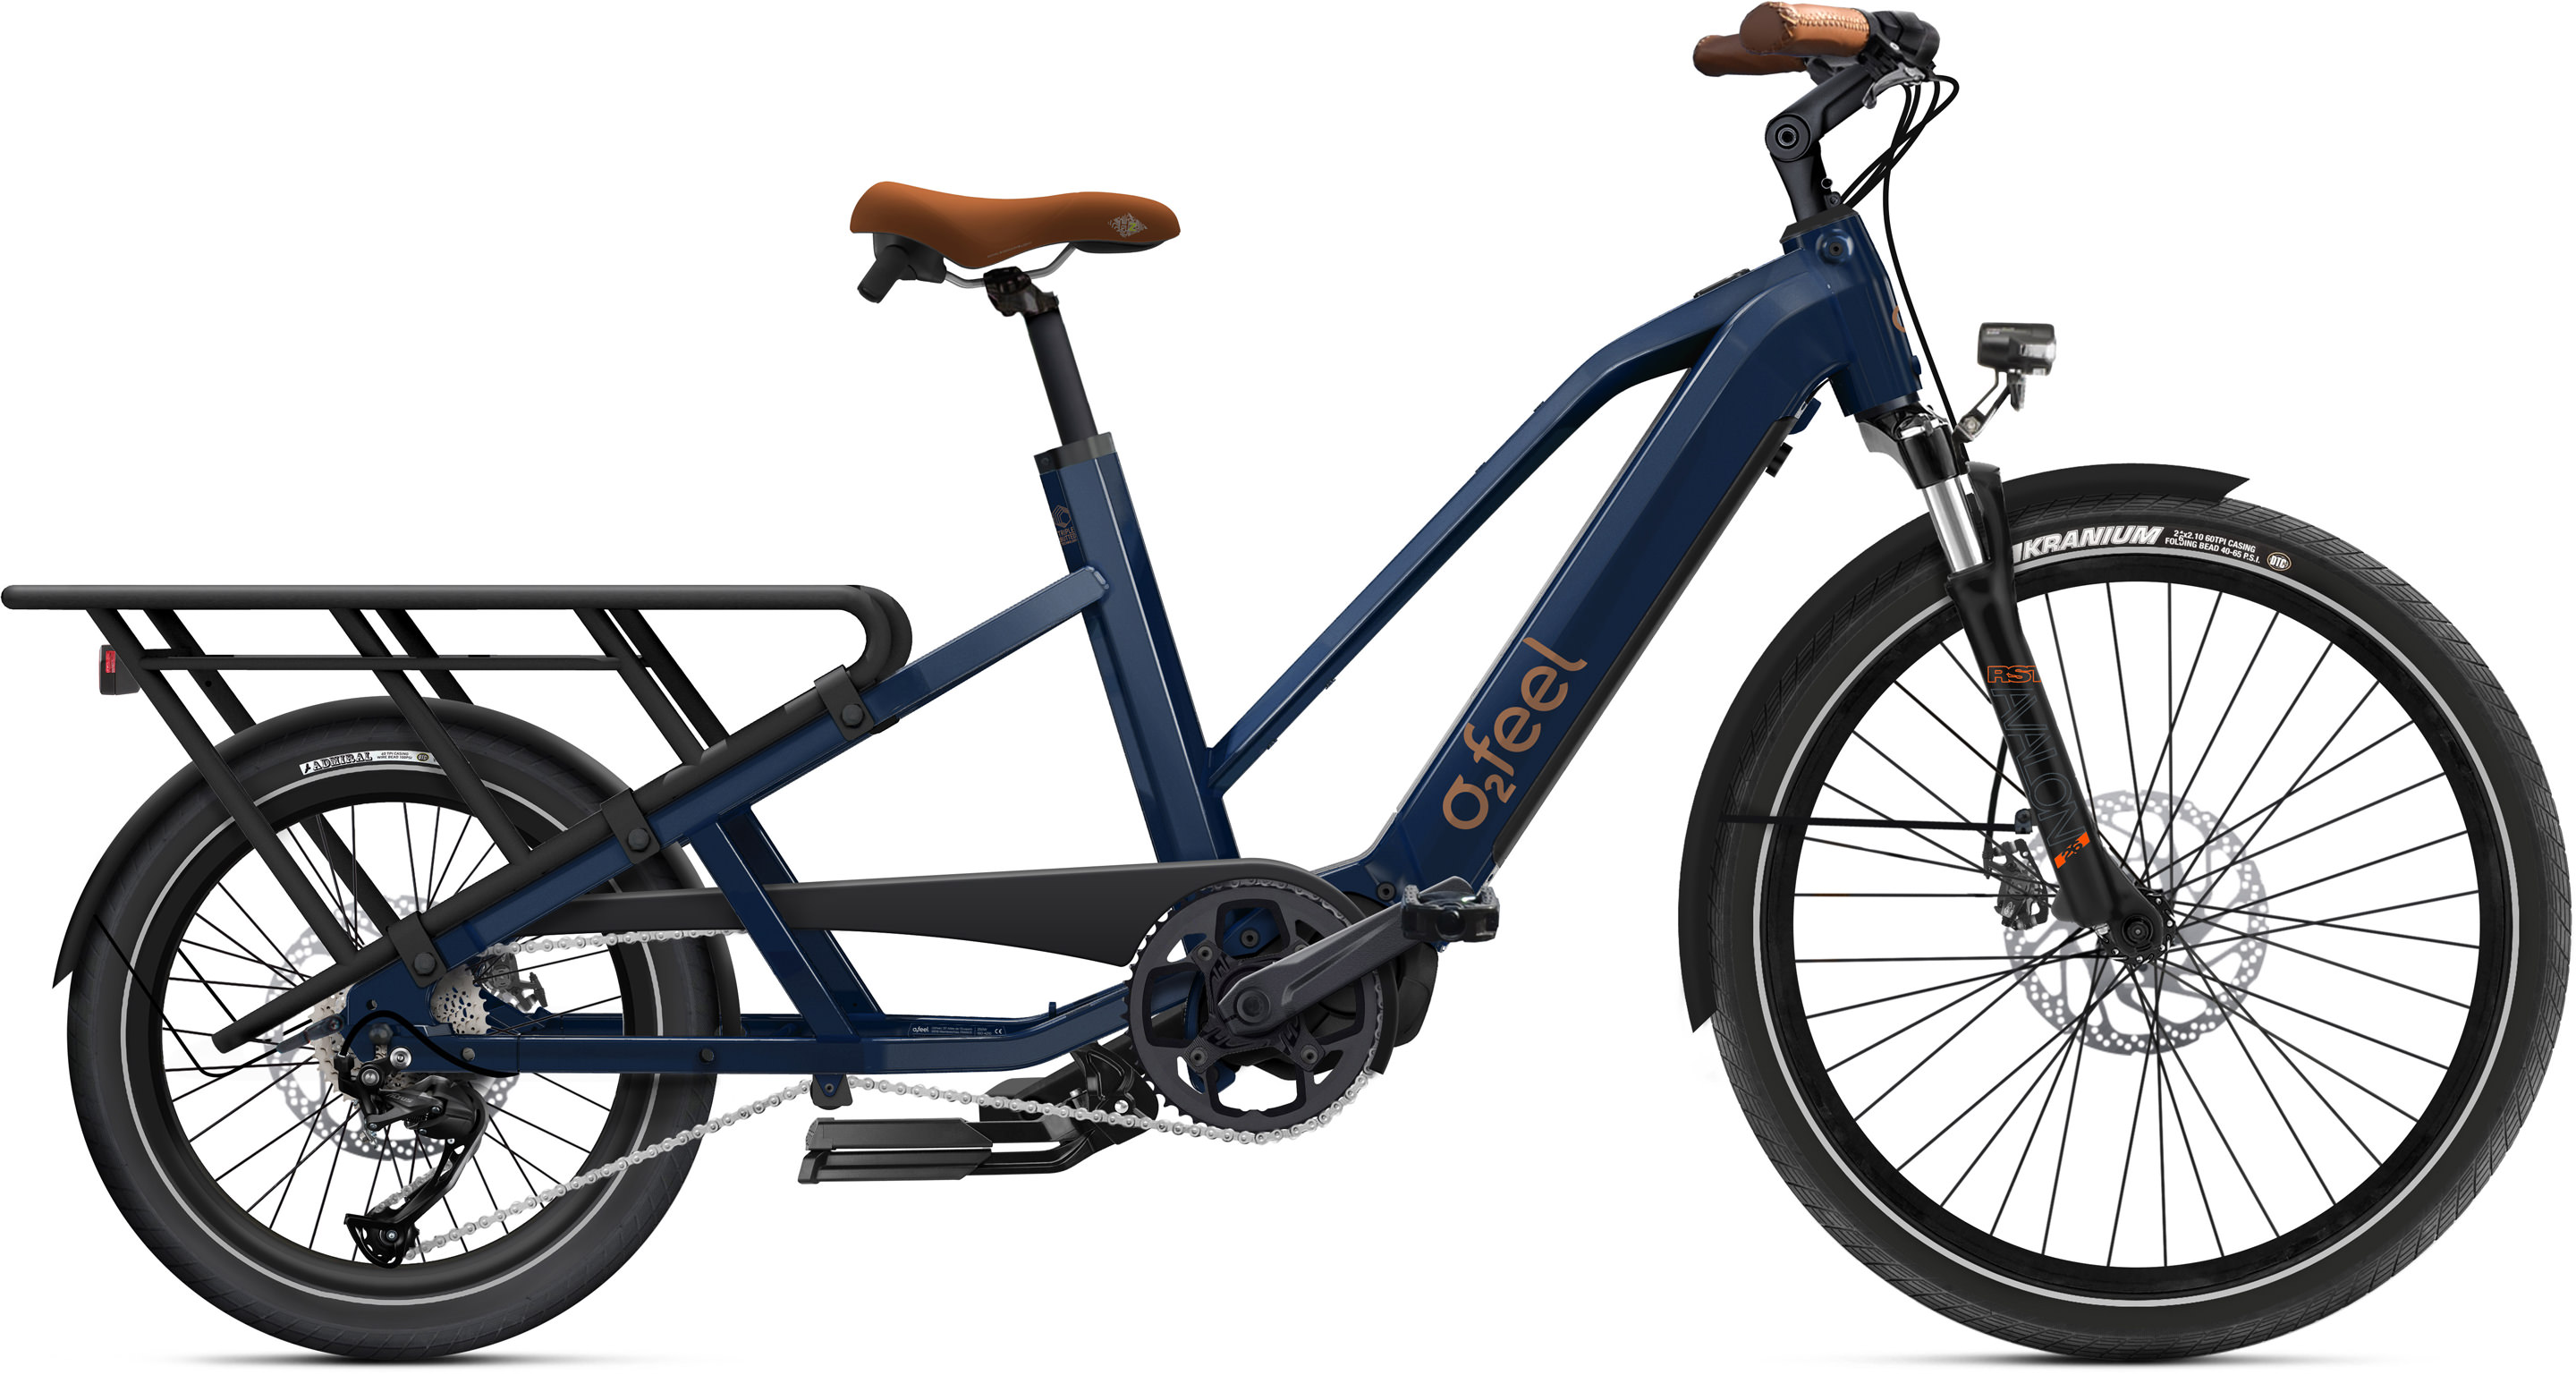 EQUO CARGO BOOST 3.1 - IPA720 | Bouticycle